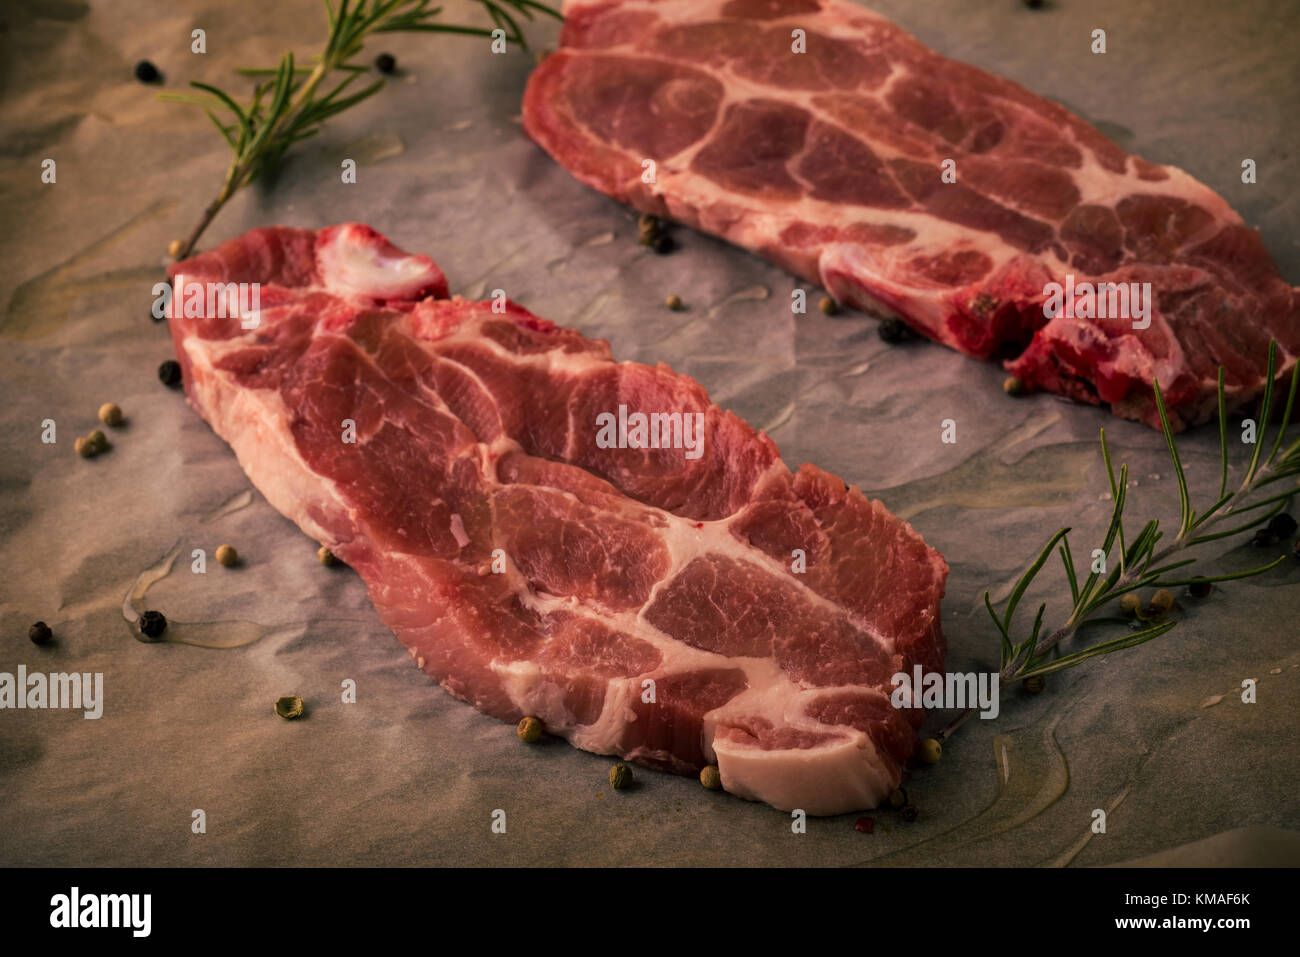 Horizontal photo of two slices of pork neck steaks. The meat portions with red color and fat is placed on worn baking sheet of paper with pepper, rose Stock Photo